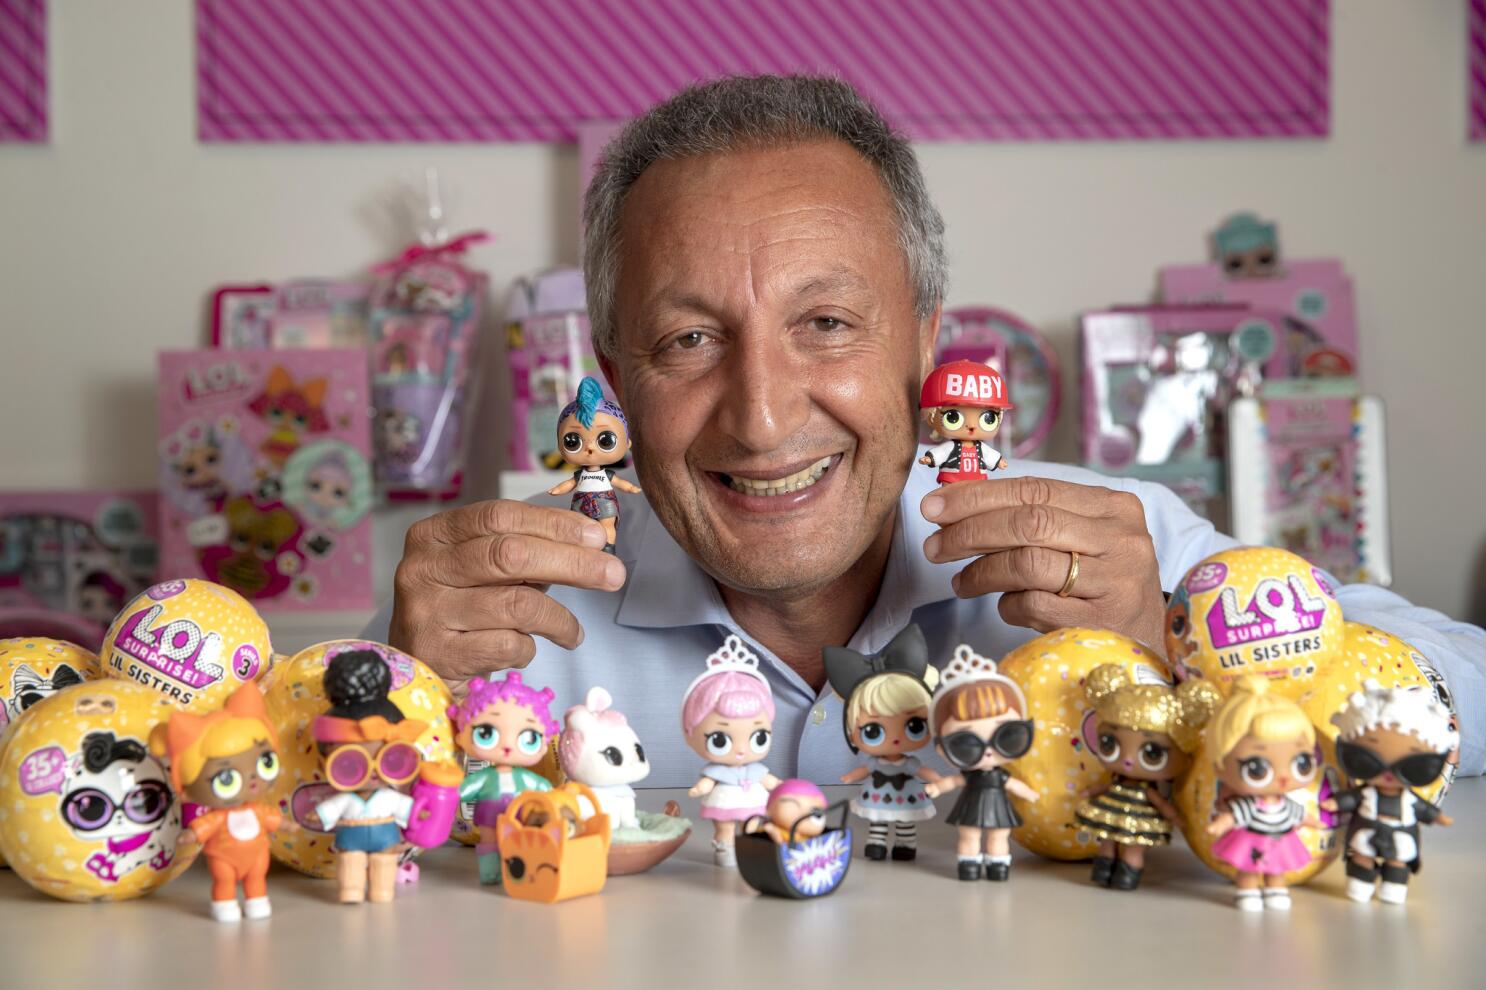 America's most popular doll is being counterfeited. L.A. toymaker MGA wants  to know who's doing it - Los Angeles Times